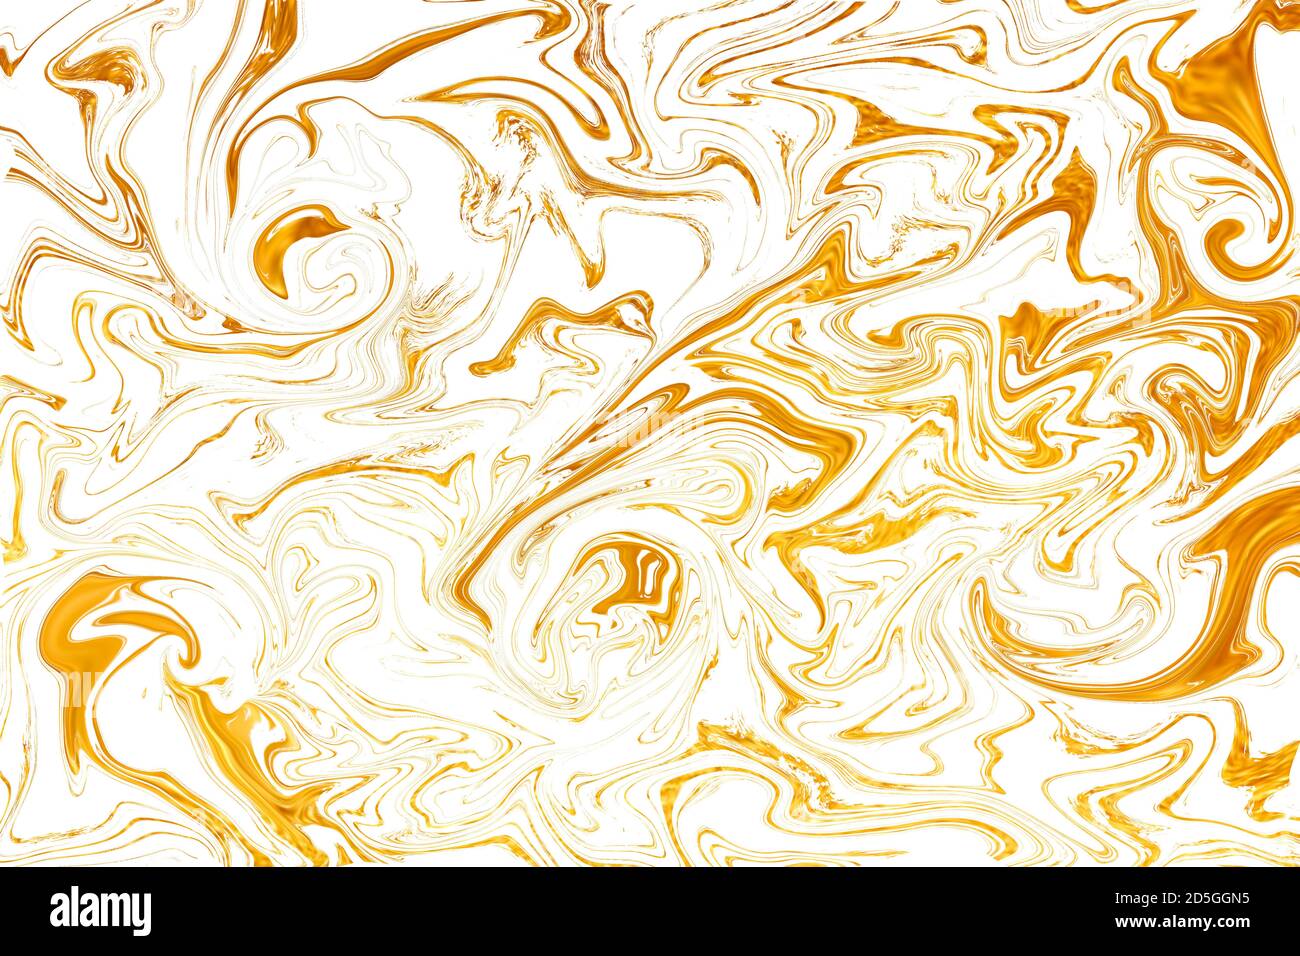 Gold liquid paint marbling wallpaper with golden gloss fluid waves background texture Stock Photo